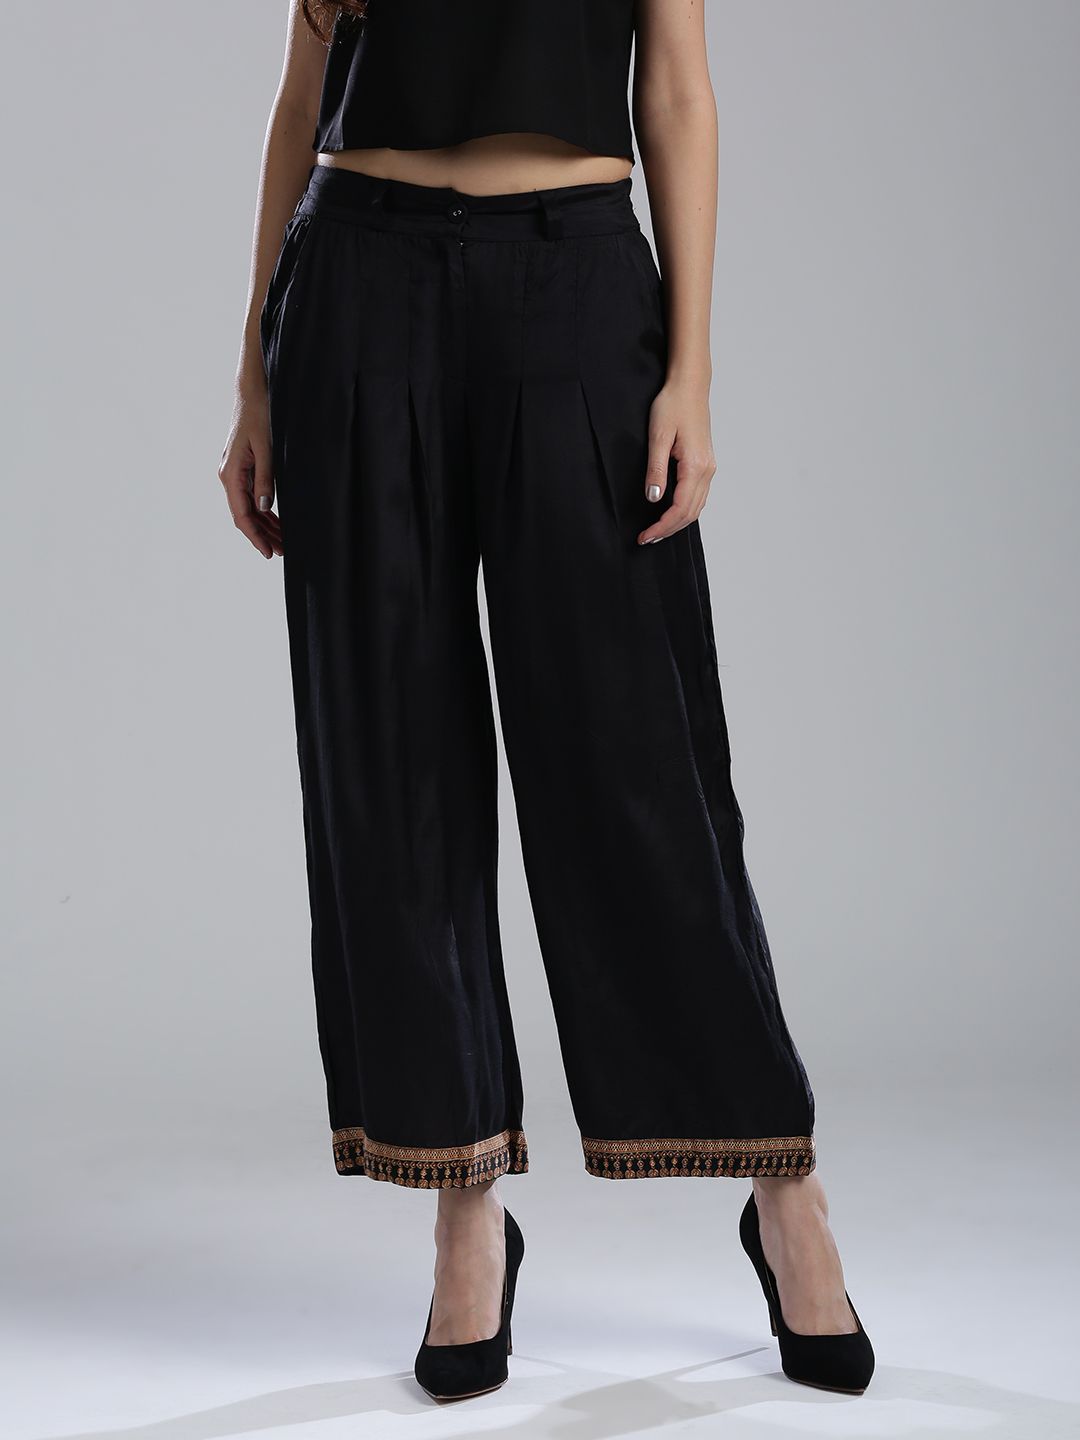 WISHFUL by W Women Black Regular Fit Solid Parallel Trousers Price in India